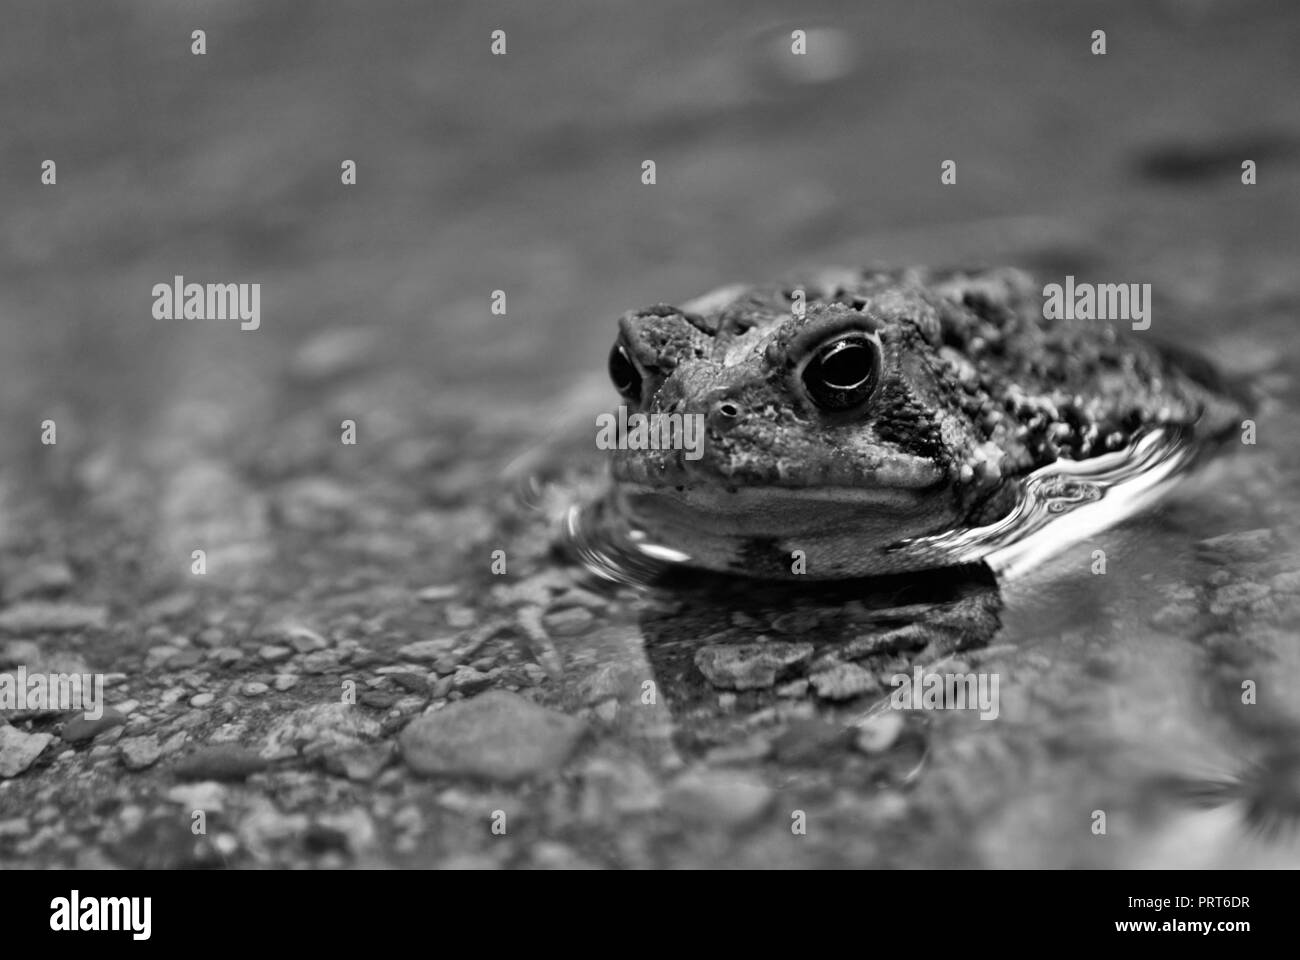 Close up view of a frog in the water Stock Photo